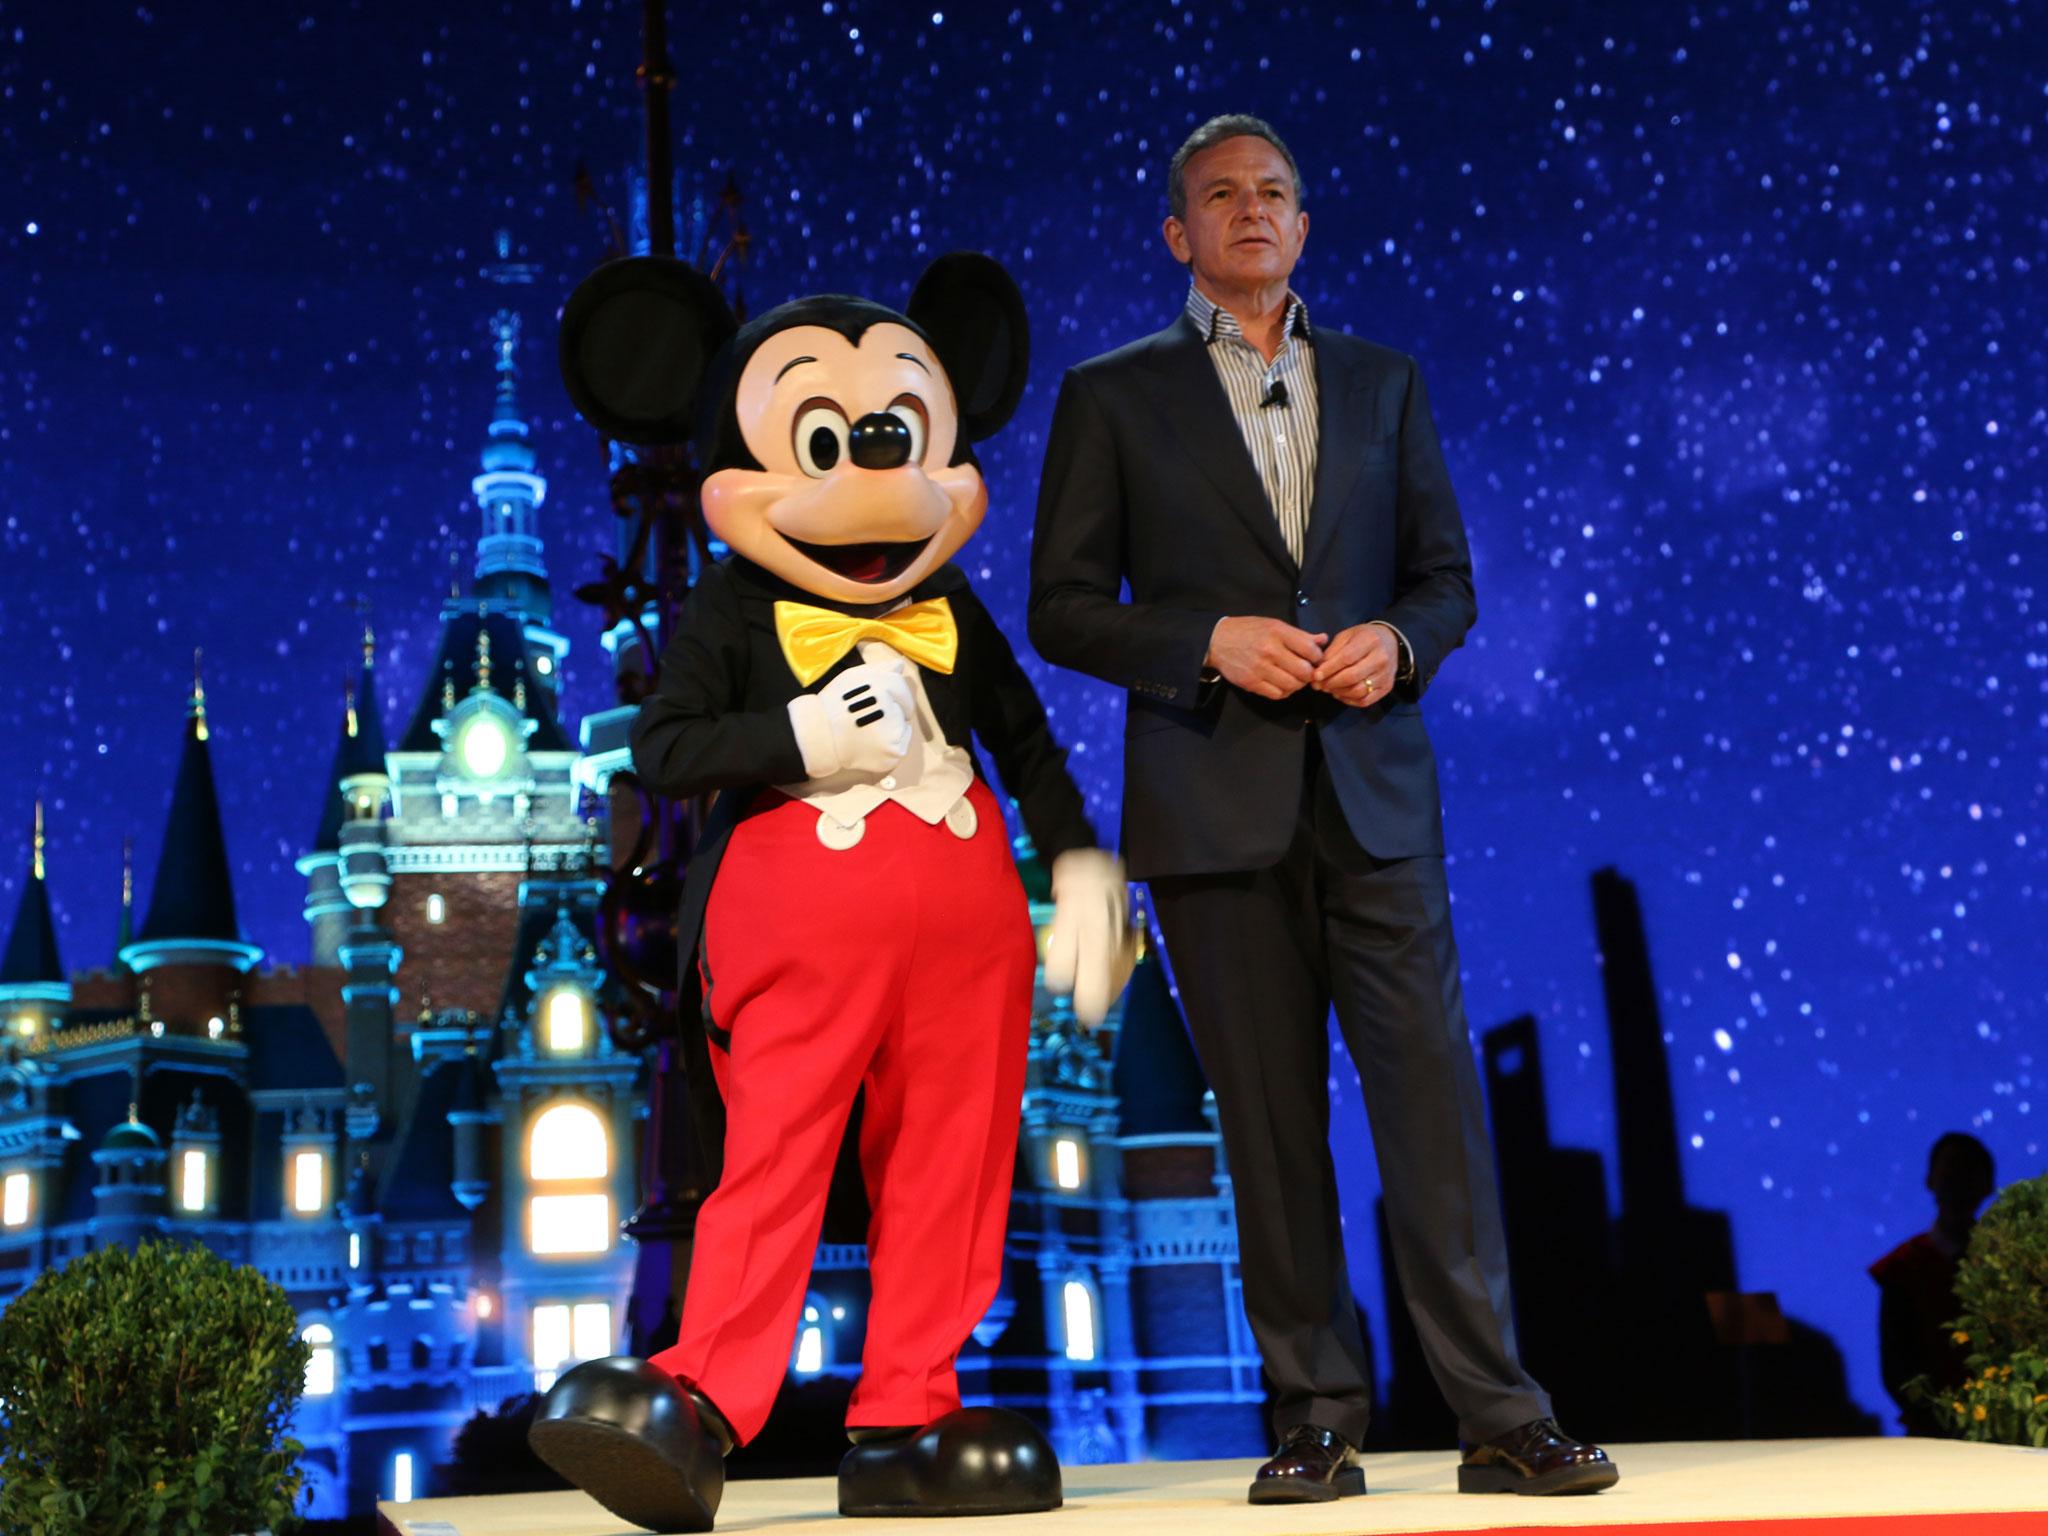 Bob Iger previously said the Shanghai park is as important for Disney today as the establishment of Walt Disney World in Florida was for the company in the sixties